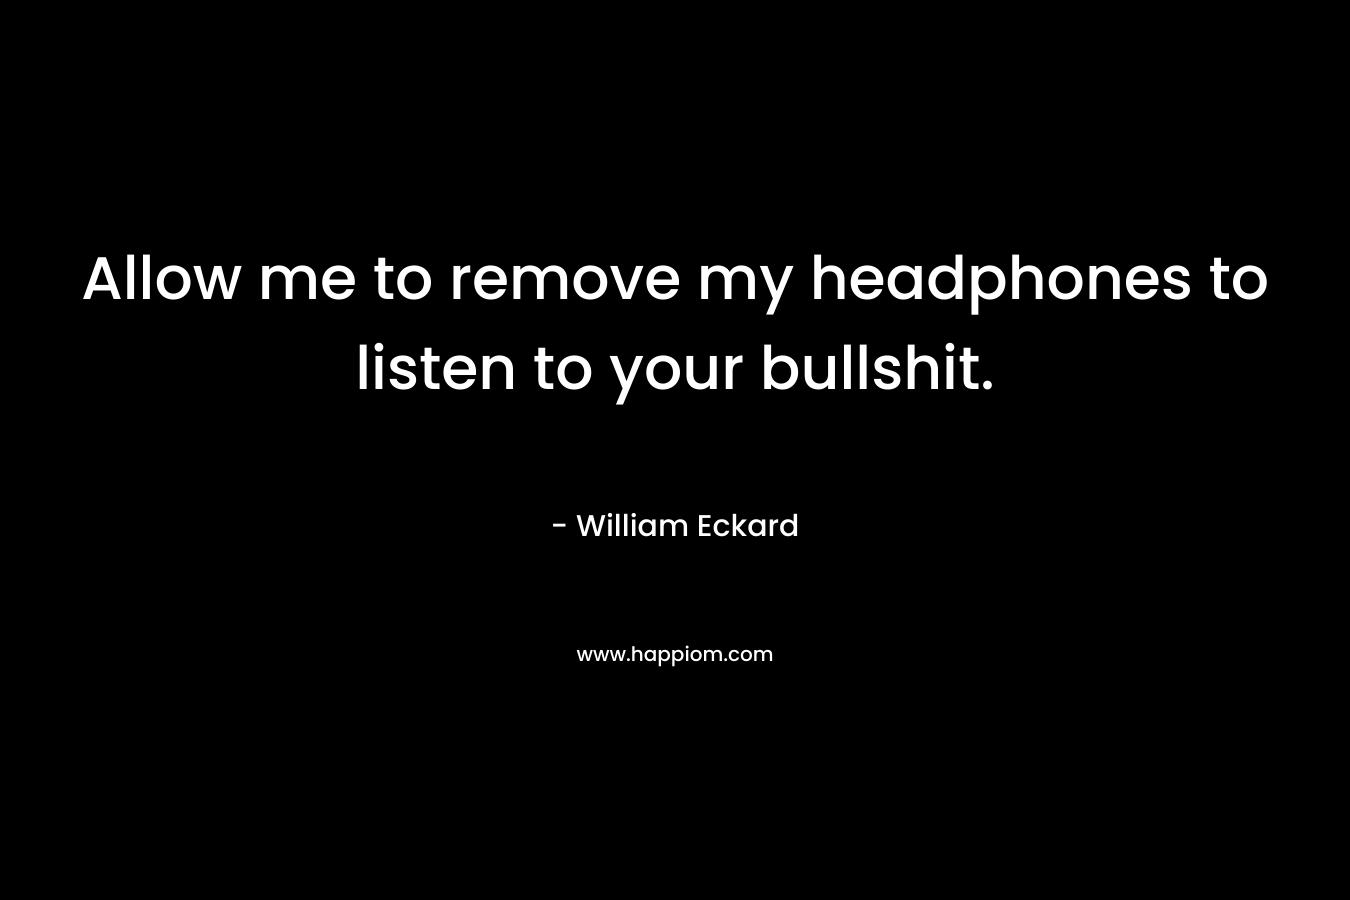 Allow me to remove my headphones to listen to your bullshit. – William Eckard